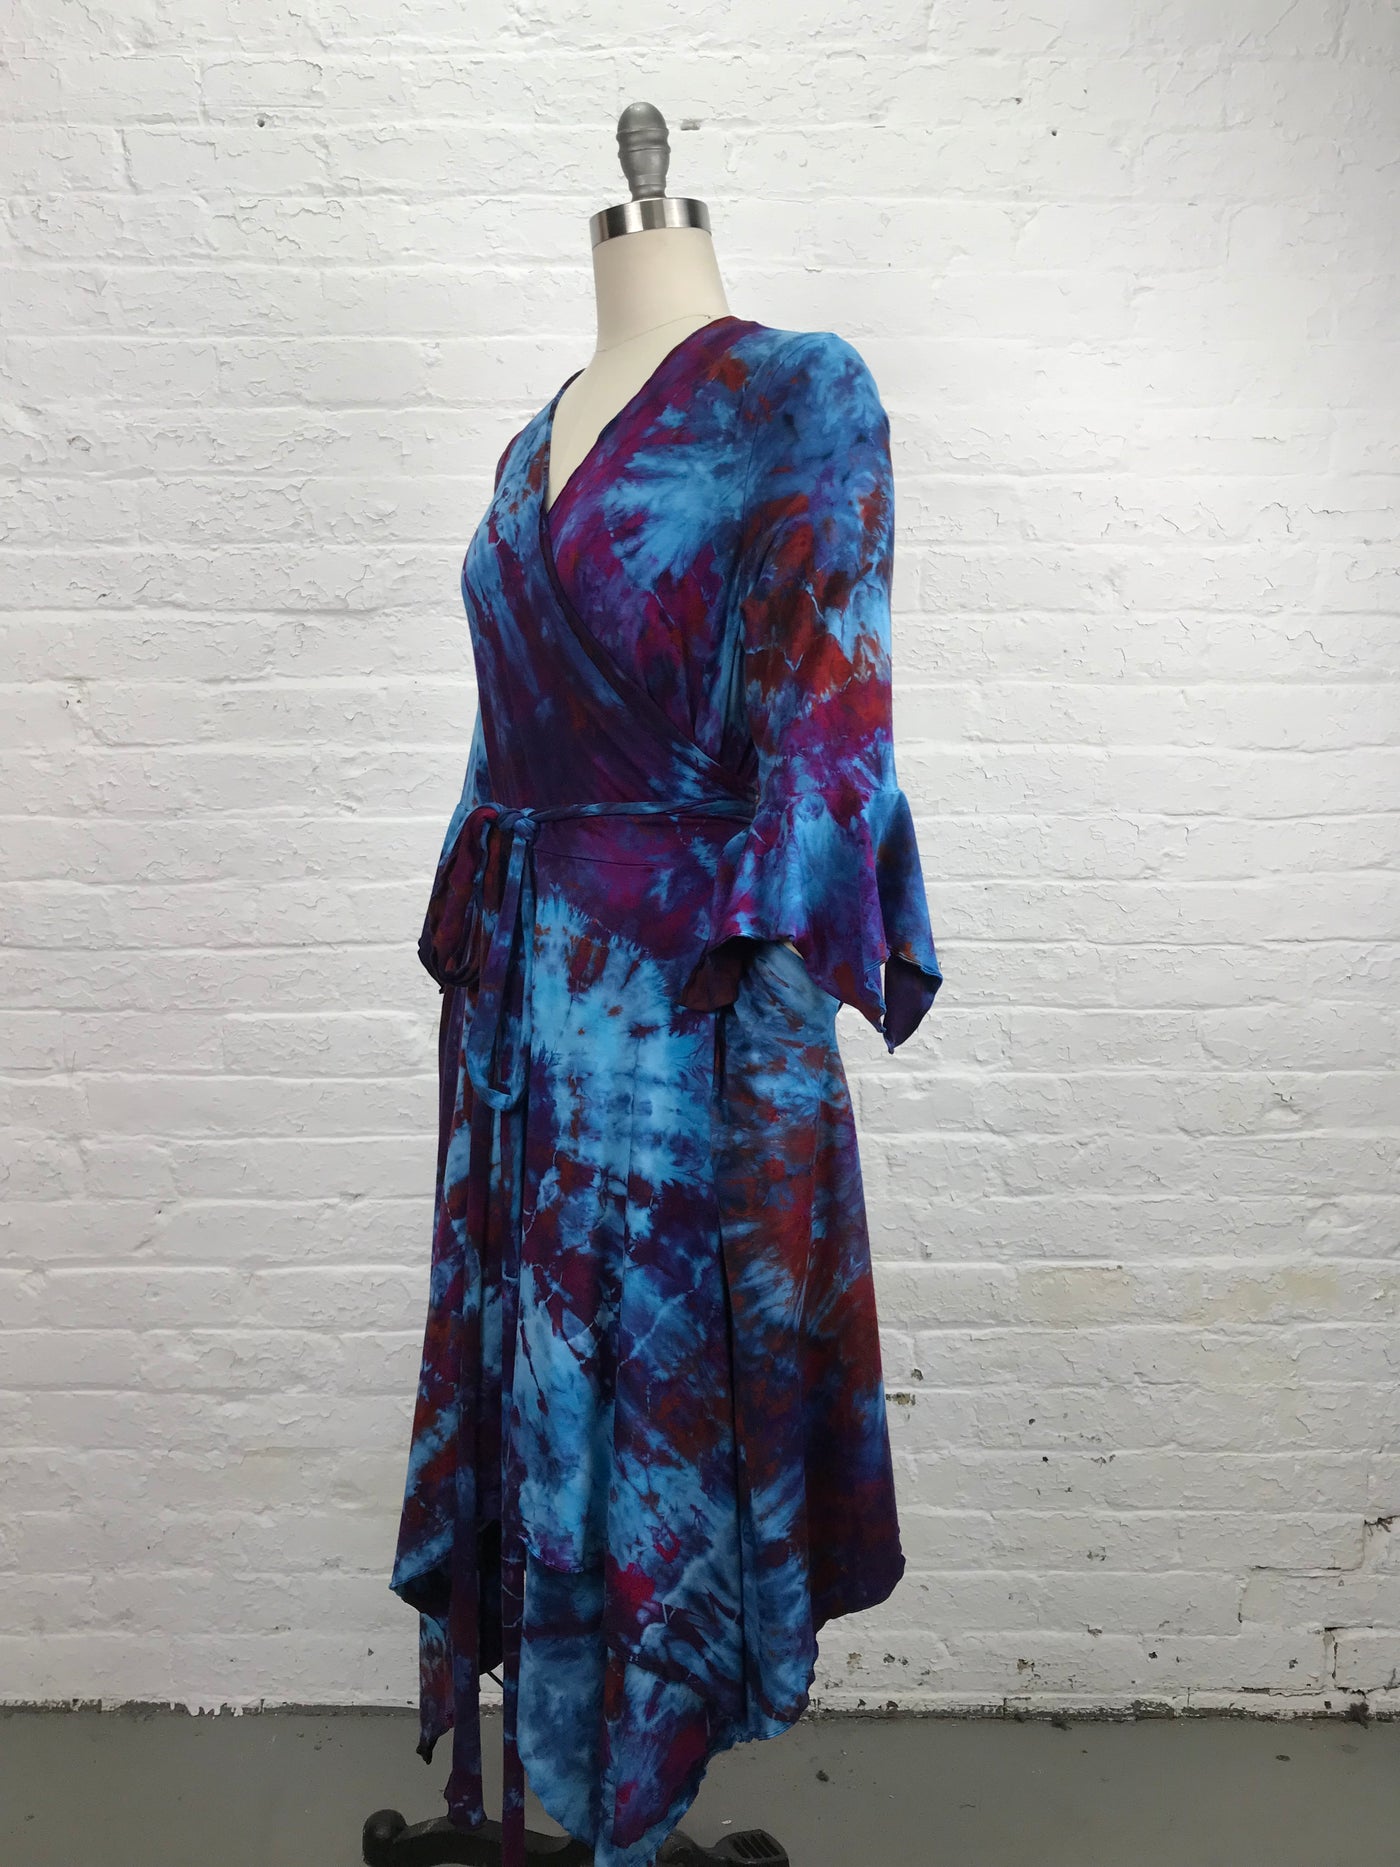 The Flamenco Wrap Dress in Falling Berries is a mix of blues and violets has an asymmetrical hemline and fitted elbow length sleeves that end in a delightful flounce. Wrap styling lends itself to an easy fit and a flattering V-neckline and pockets - side view